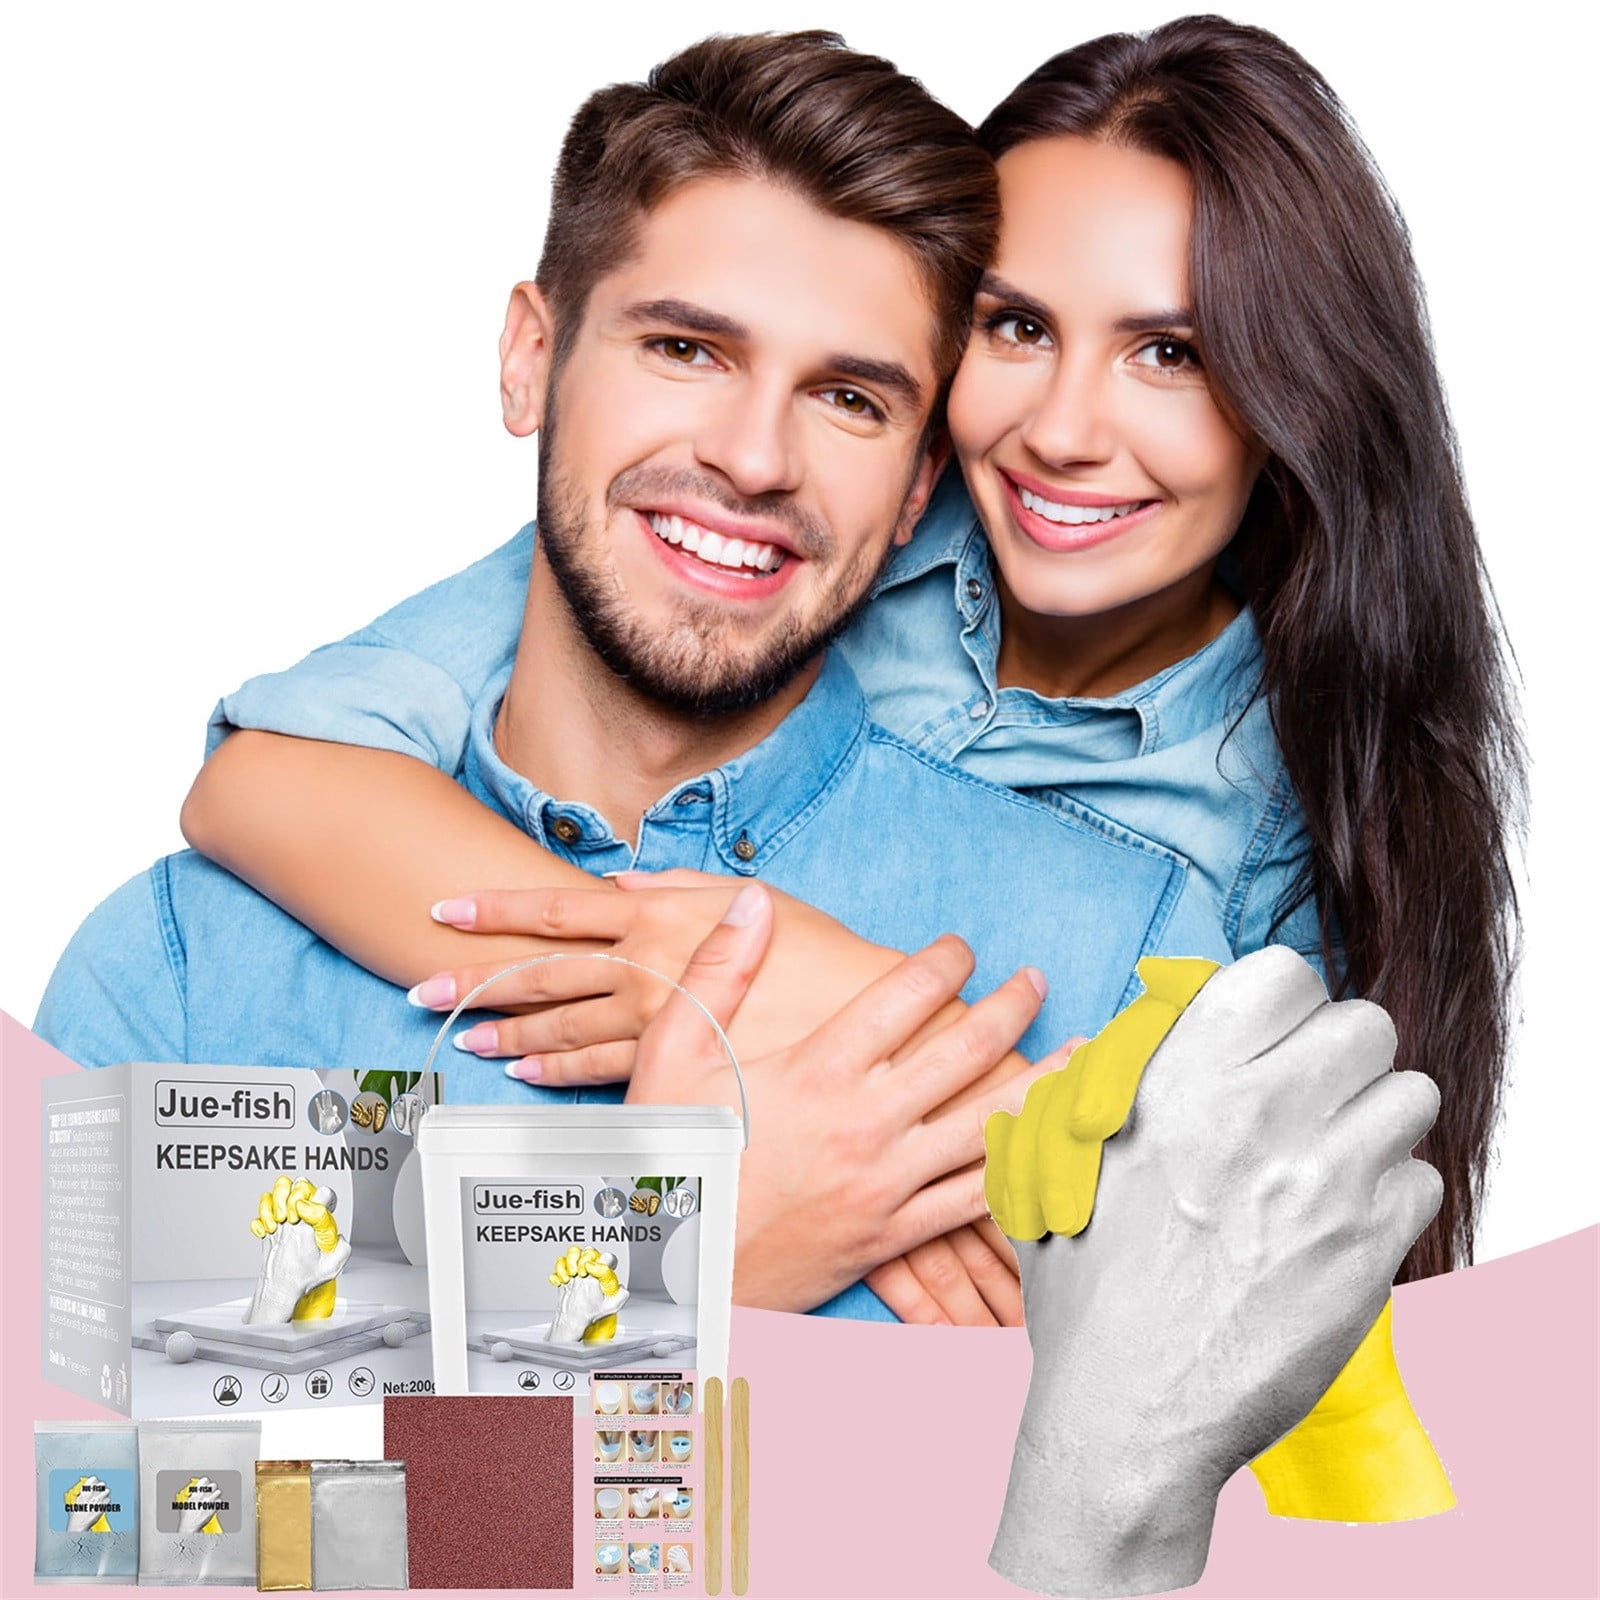 Discovering DIY Hand Casting Kit Couples - Hand Mold Kit Couples, Wedding  Engagement Gifts for Couples Husband Wife, Girlfriend Boyfriend